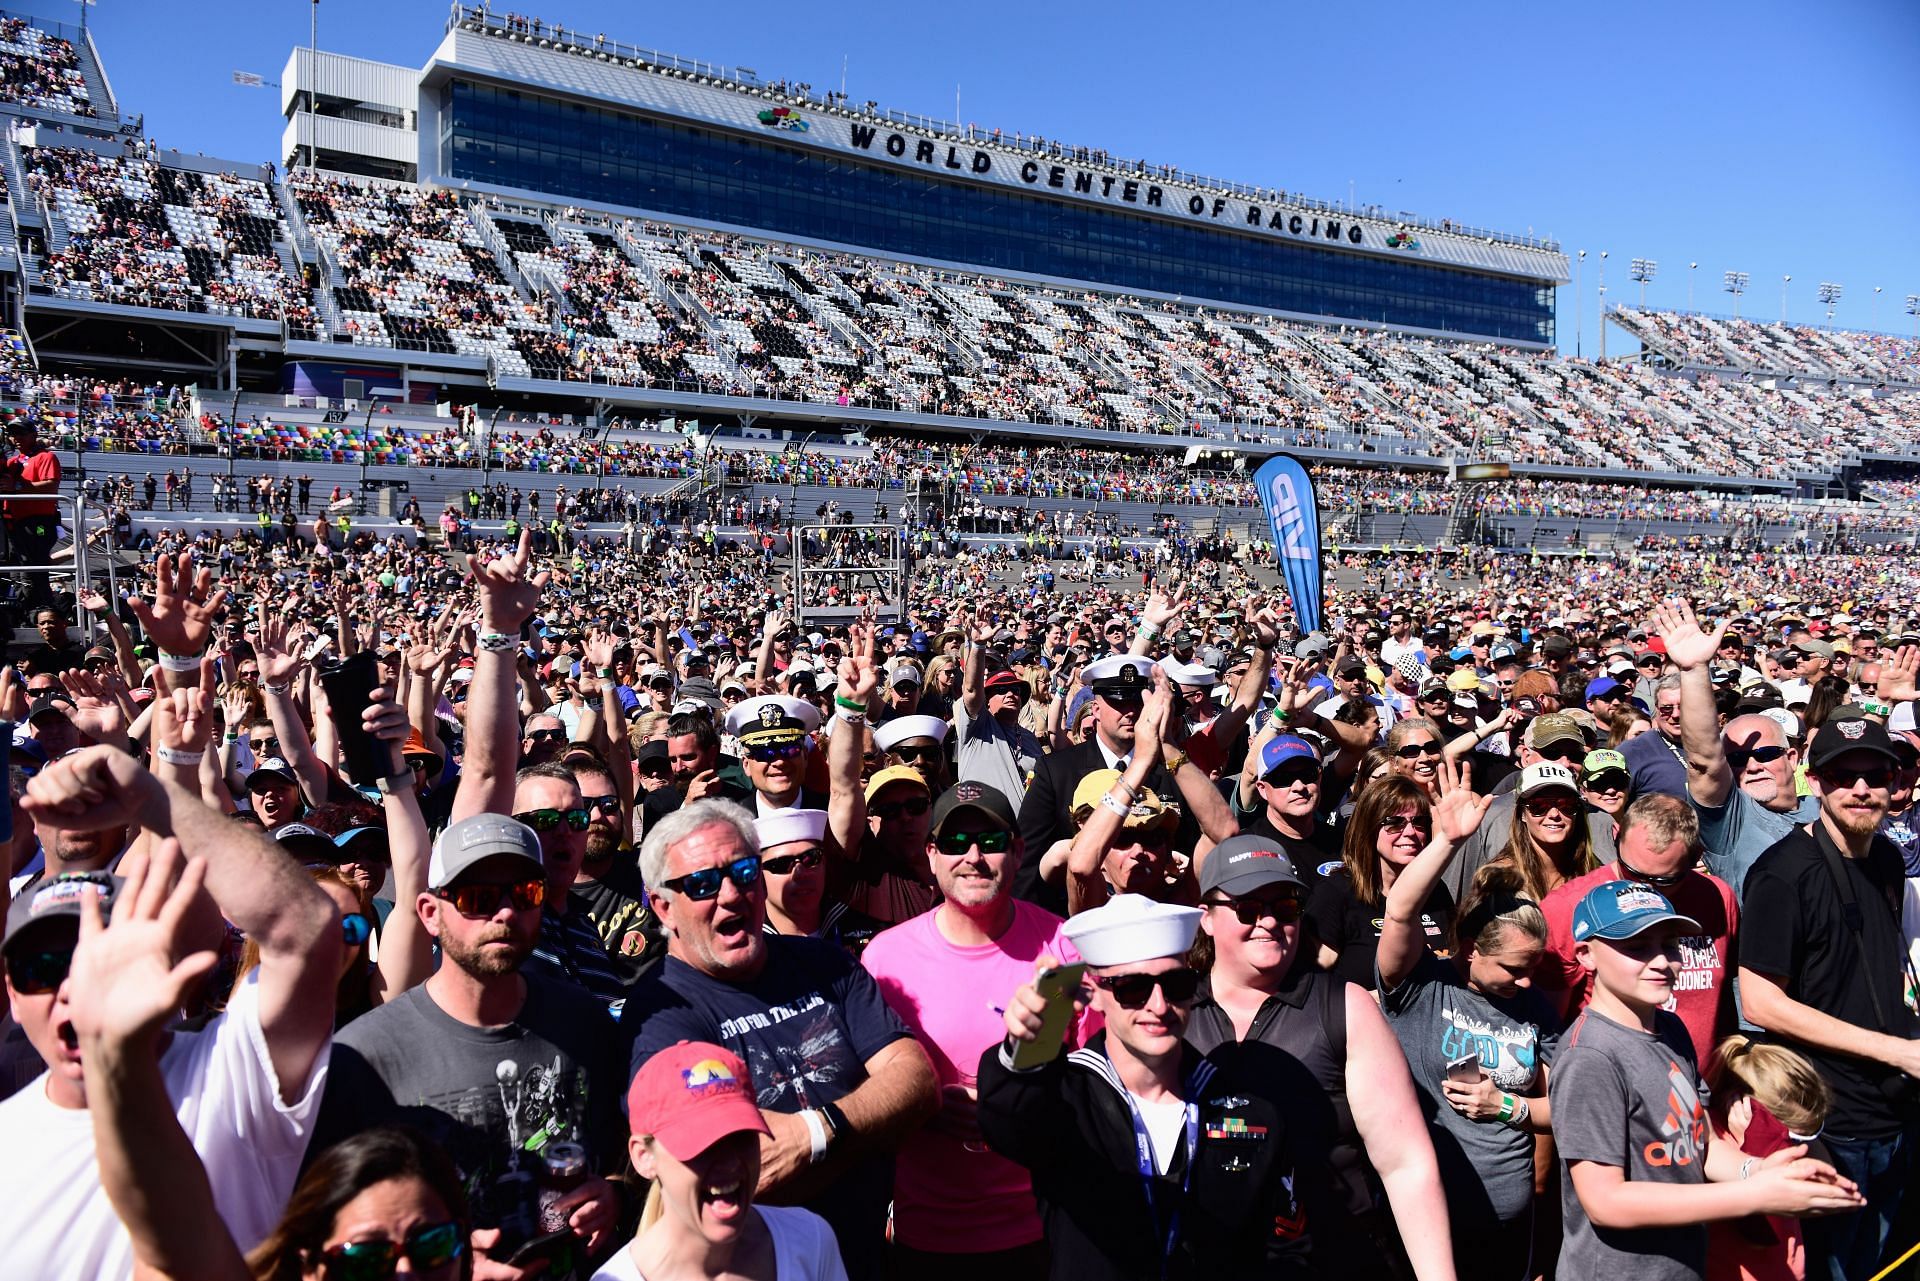 Crowds at the Daytona International Speedway in 2018 (Photo by Jared C. Tilton/Getty Images)